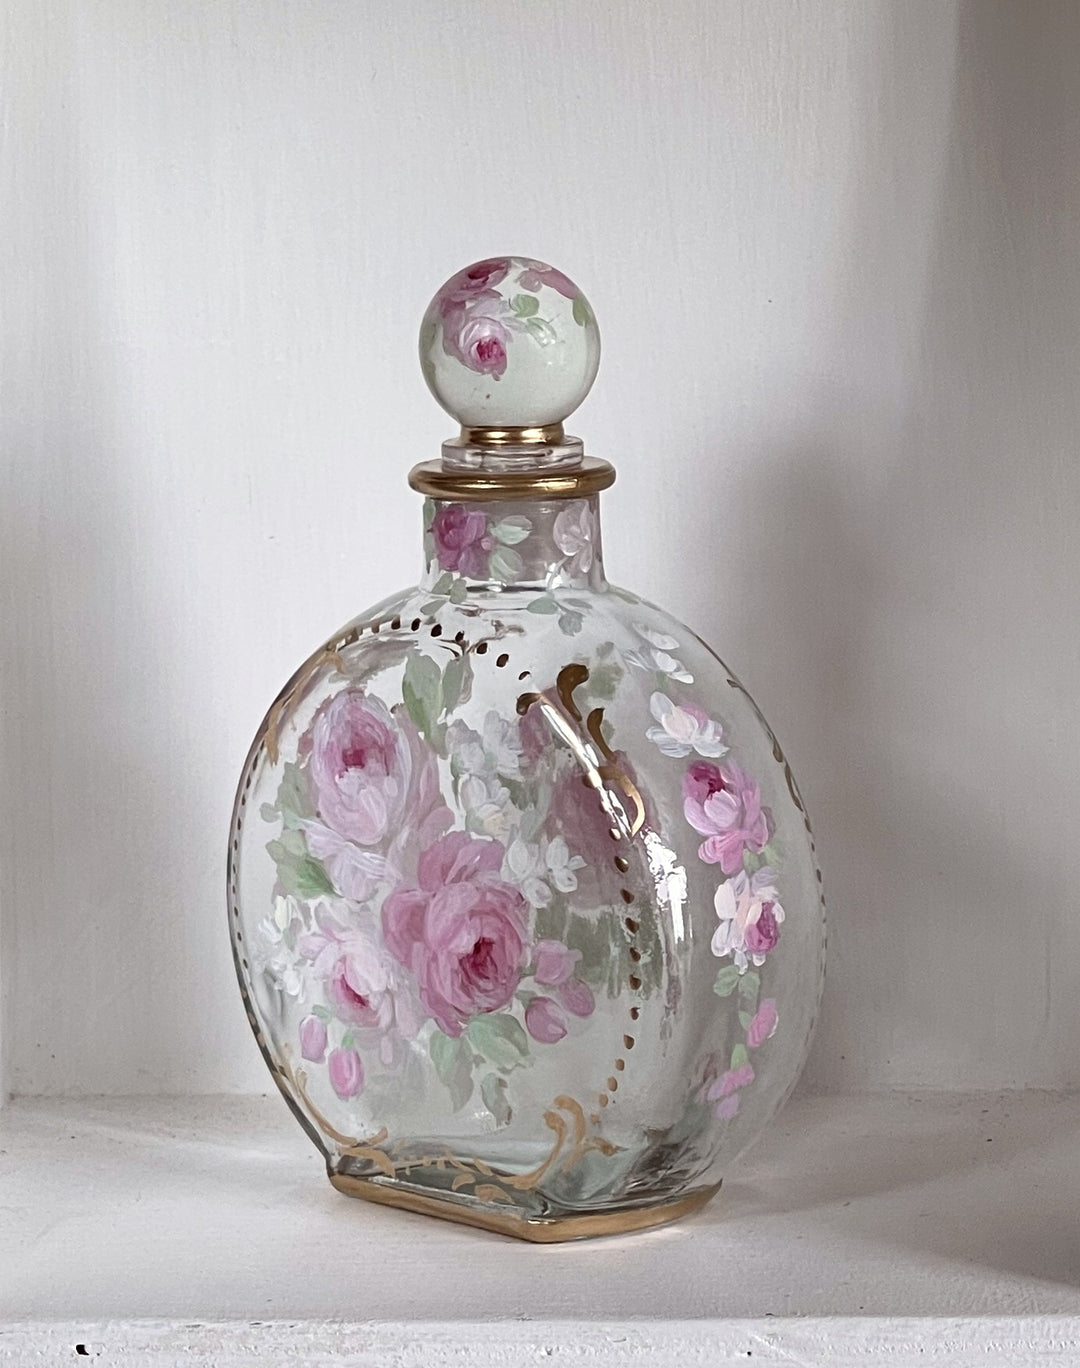 Shabby Chic Hand Painted Pink Roses Glass Perfume Bottle Original by Debi Coules